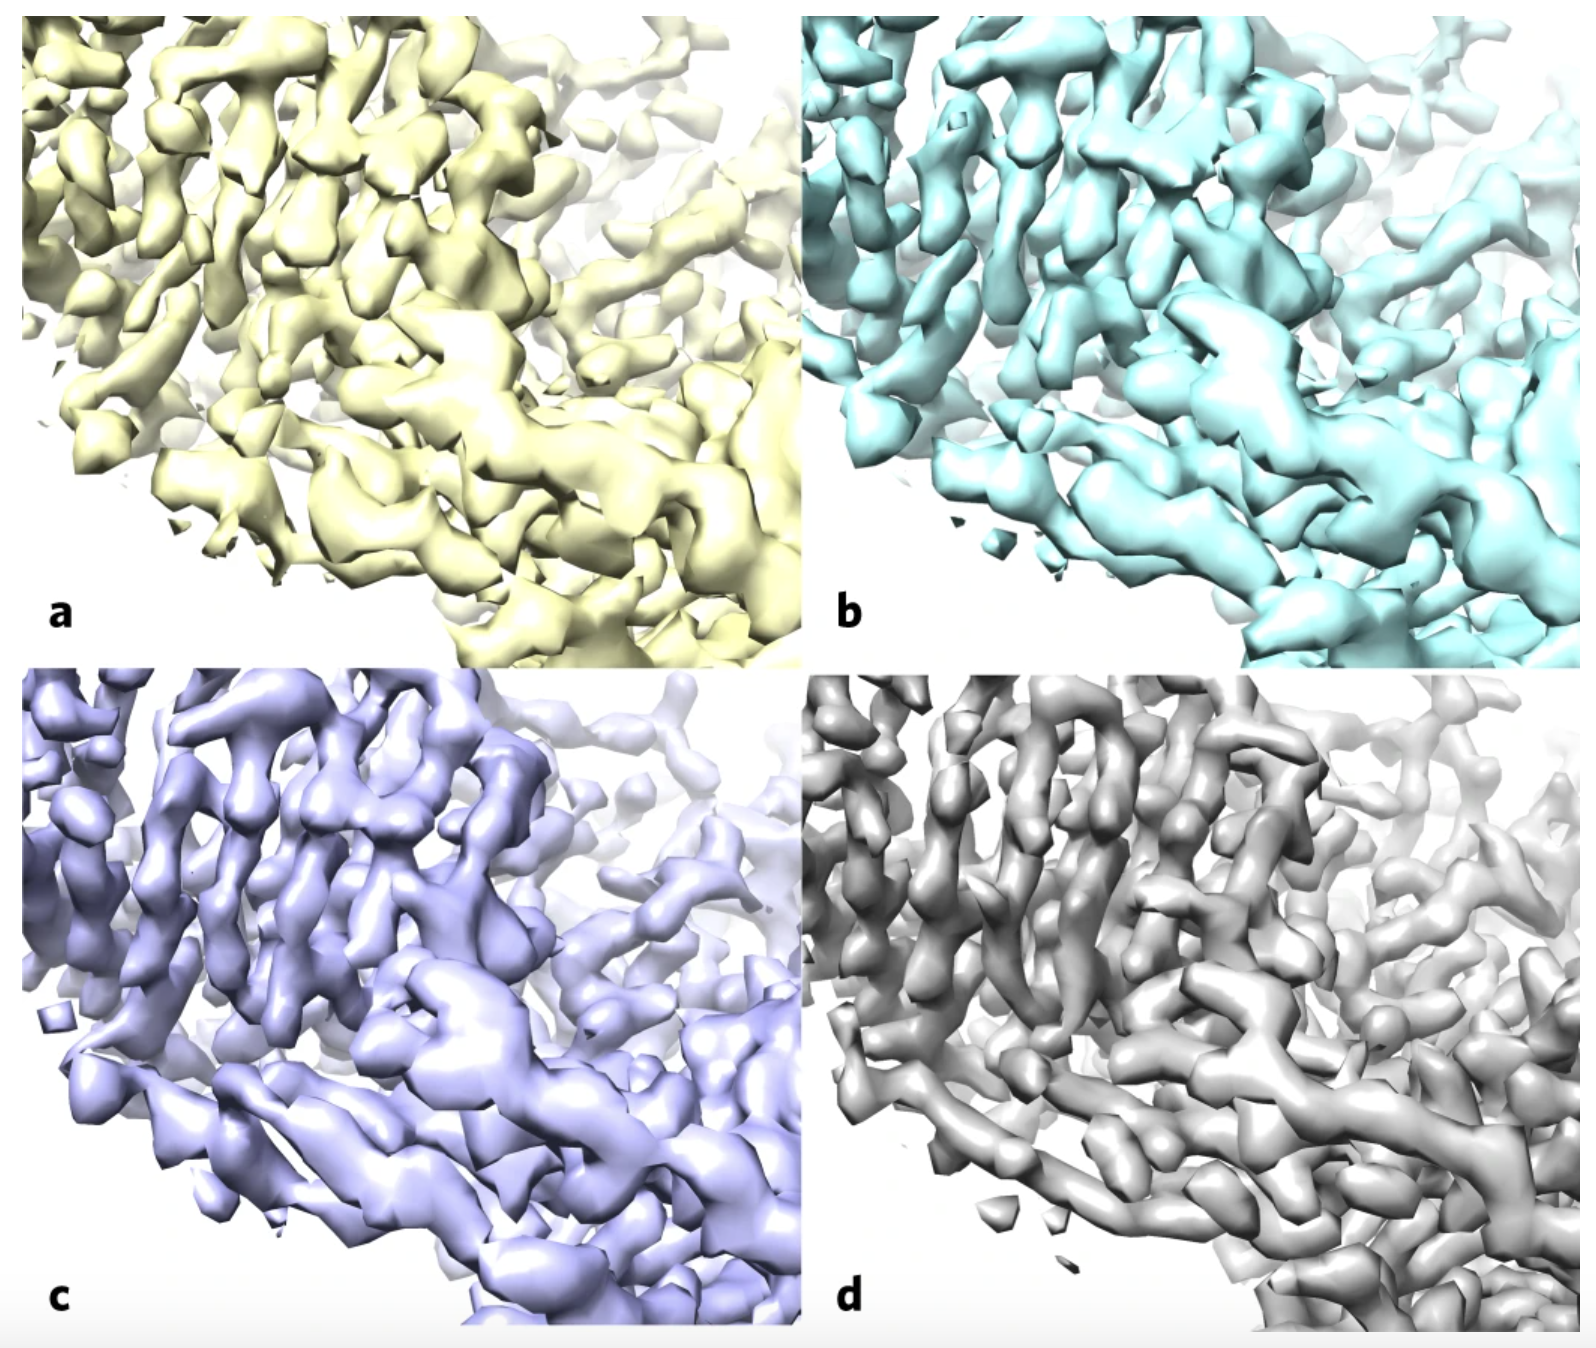 A comparison of cryo-EM structure maps of the enzyme lactase demonstrated the improvements made by the new algorithm